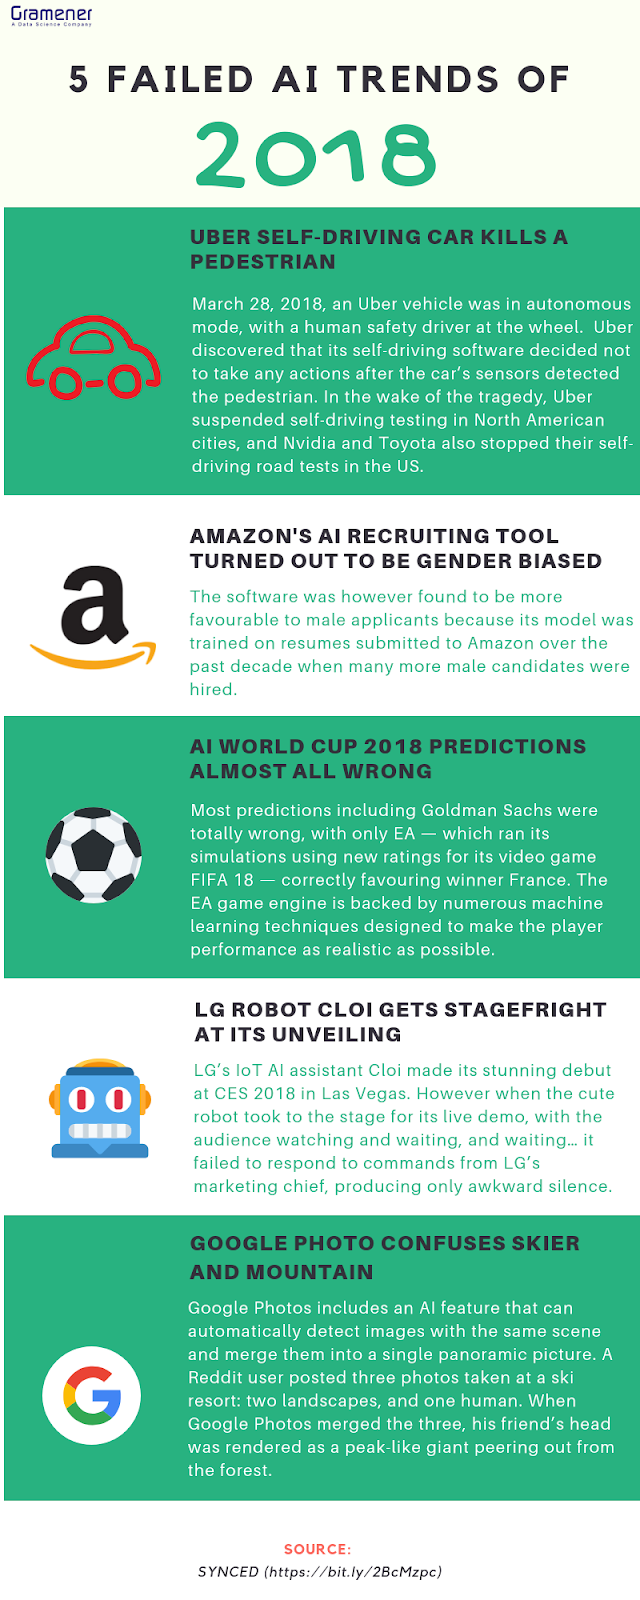 Infographic for Failed Artificial Intelligence trends in 2018 for the "Will Enterprises Reap the Benefits of Artificial Intelligence in 2019?" Blog post